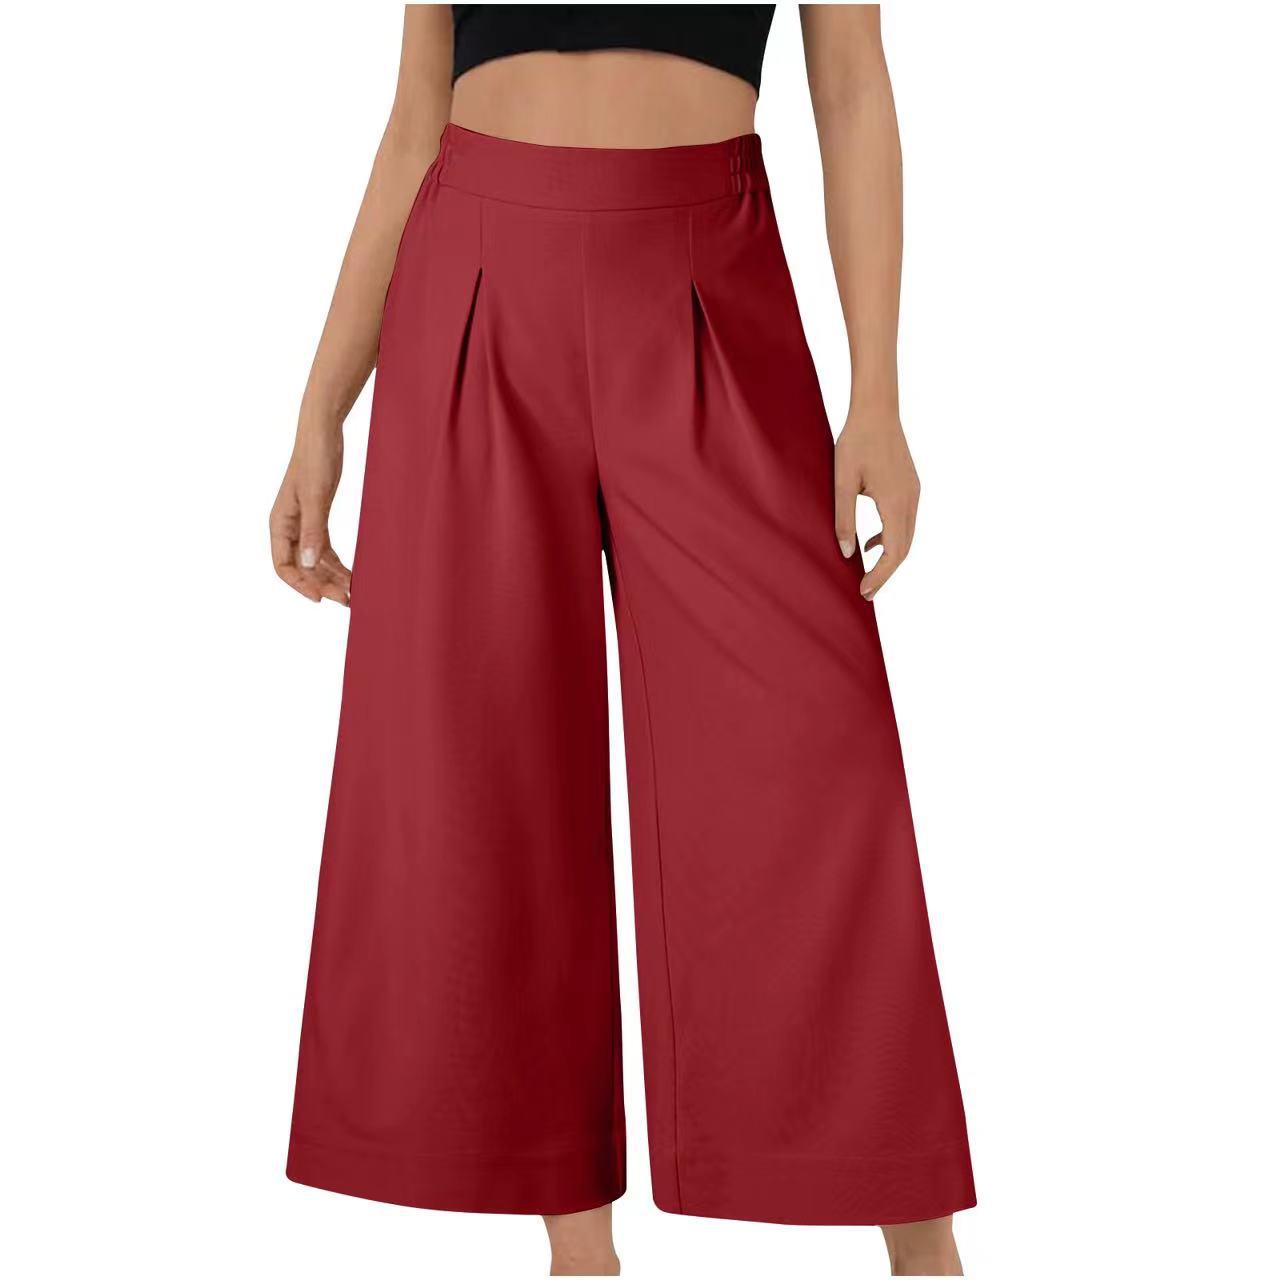 European and American Style Women's Loose Comfortable Fashion Casual Pants